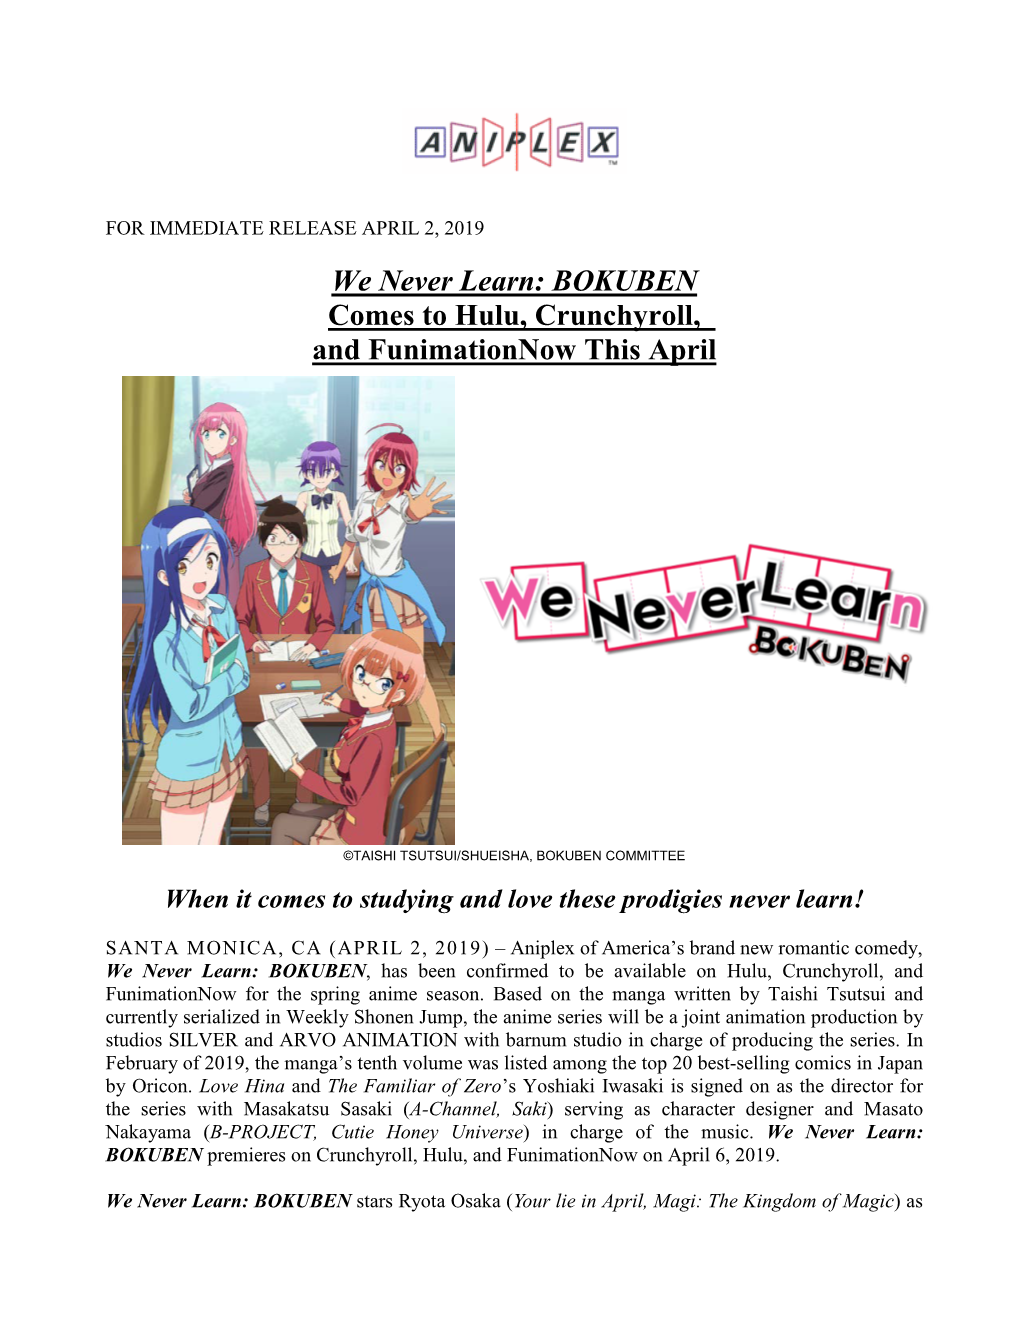 We Never Learn: BOKUBEN Comes to Hulu, Crunchyroll, and Funimationnow This April